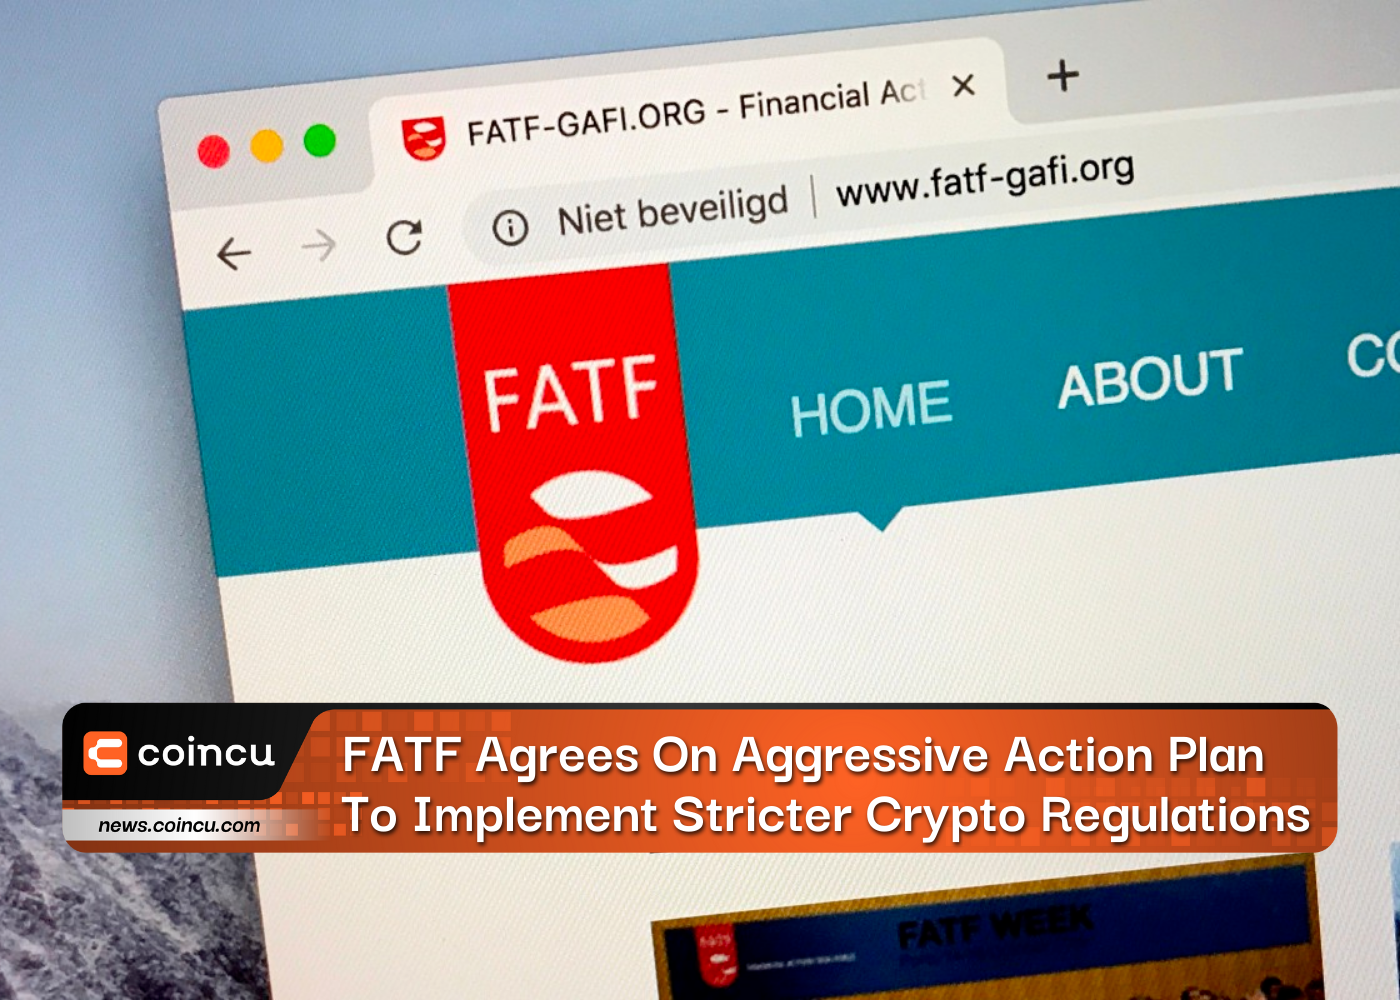 FATF Agrees On Aggressive Action Plan To Implement Stricter Crypto Regulations